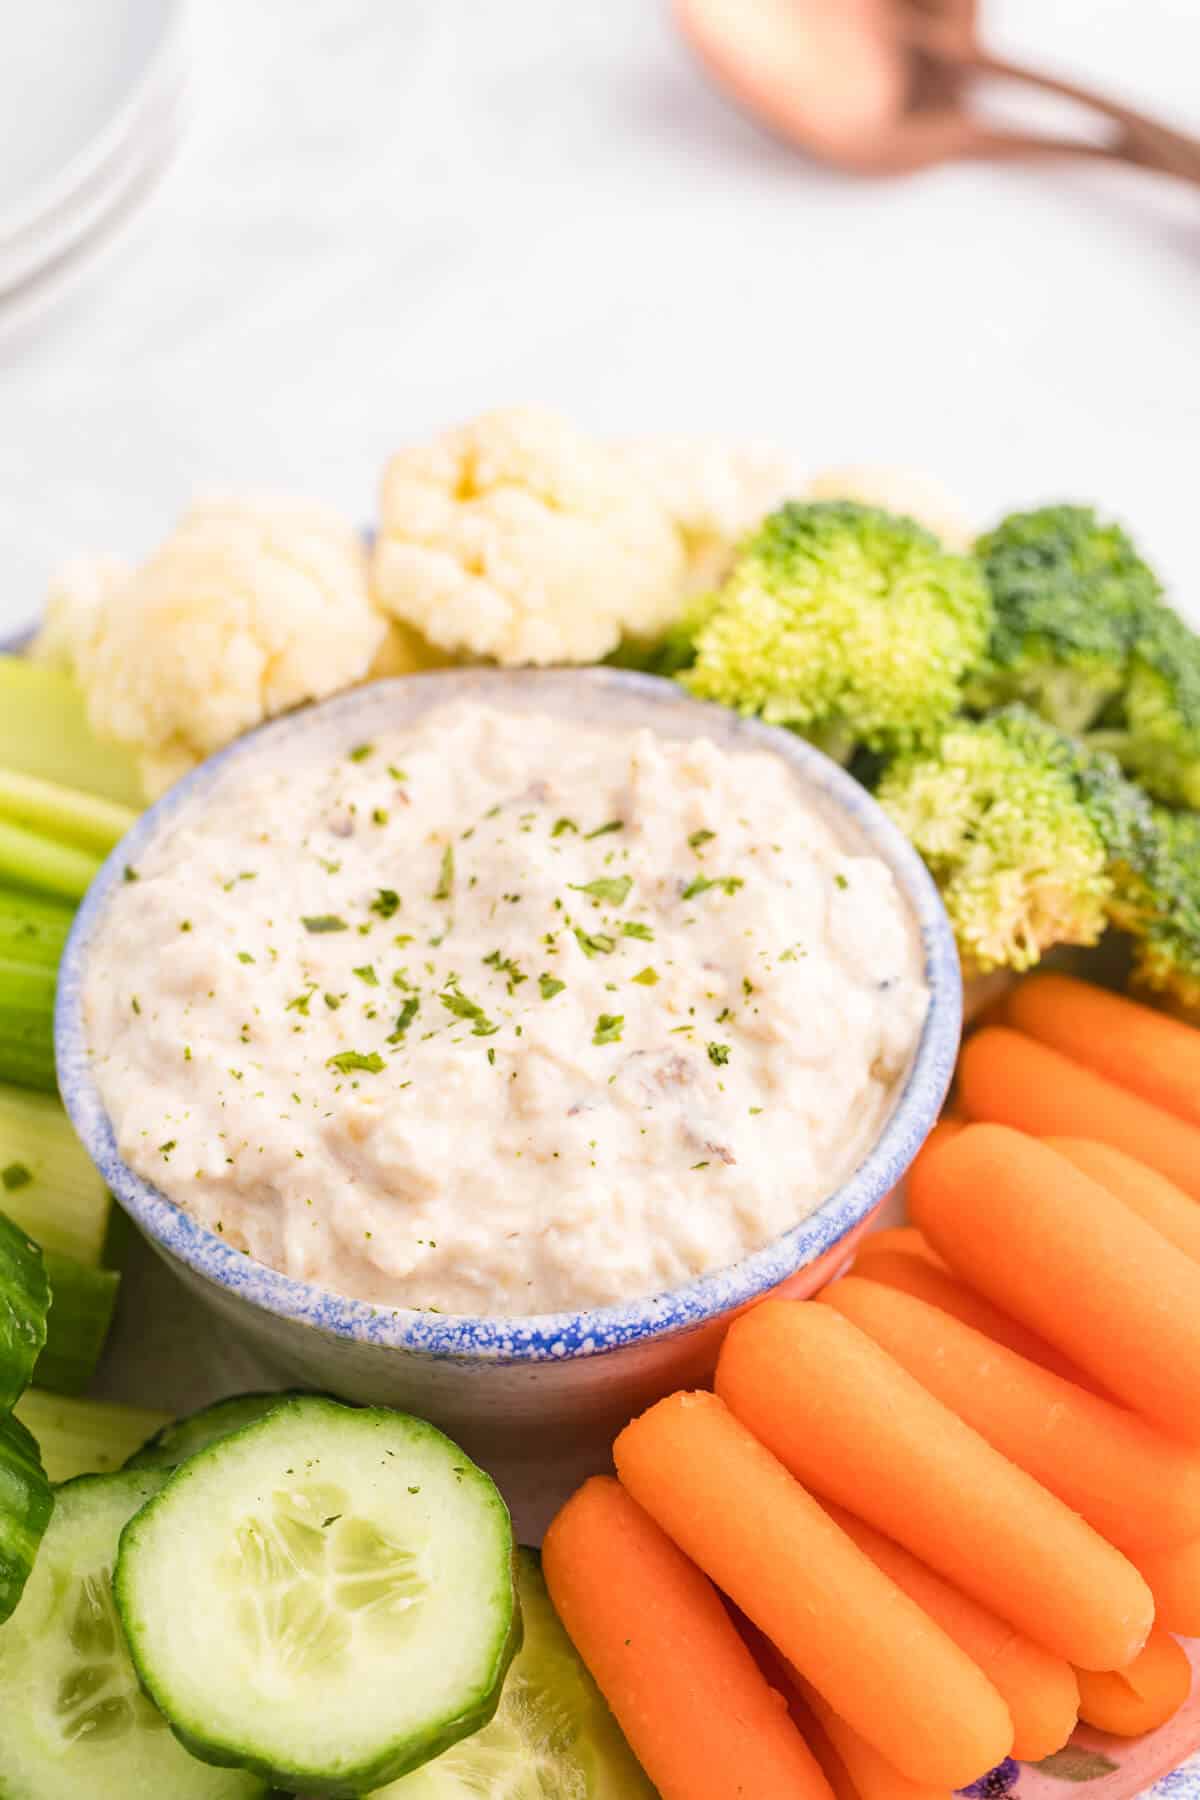 Grilled Eggplant Dip Recipe - An easy and healthy appetizer perfect for parties! Eggplant is grilled to perfection and added to a creamy lemon garlic yogurt based dip. Serve with fresh veggies or crackers.